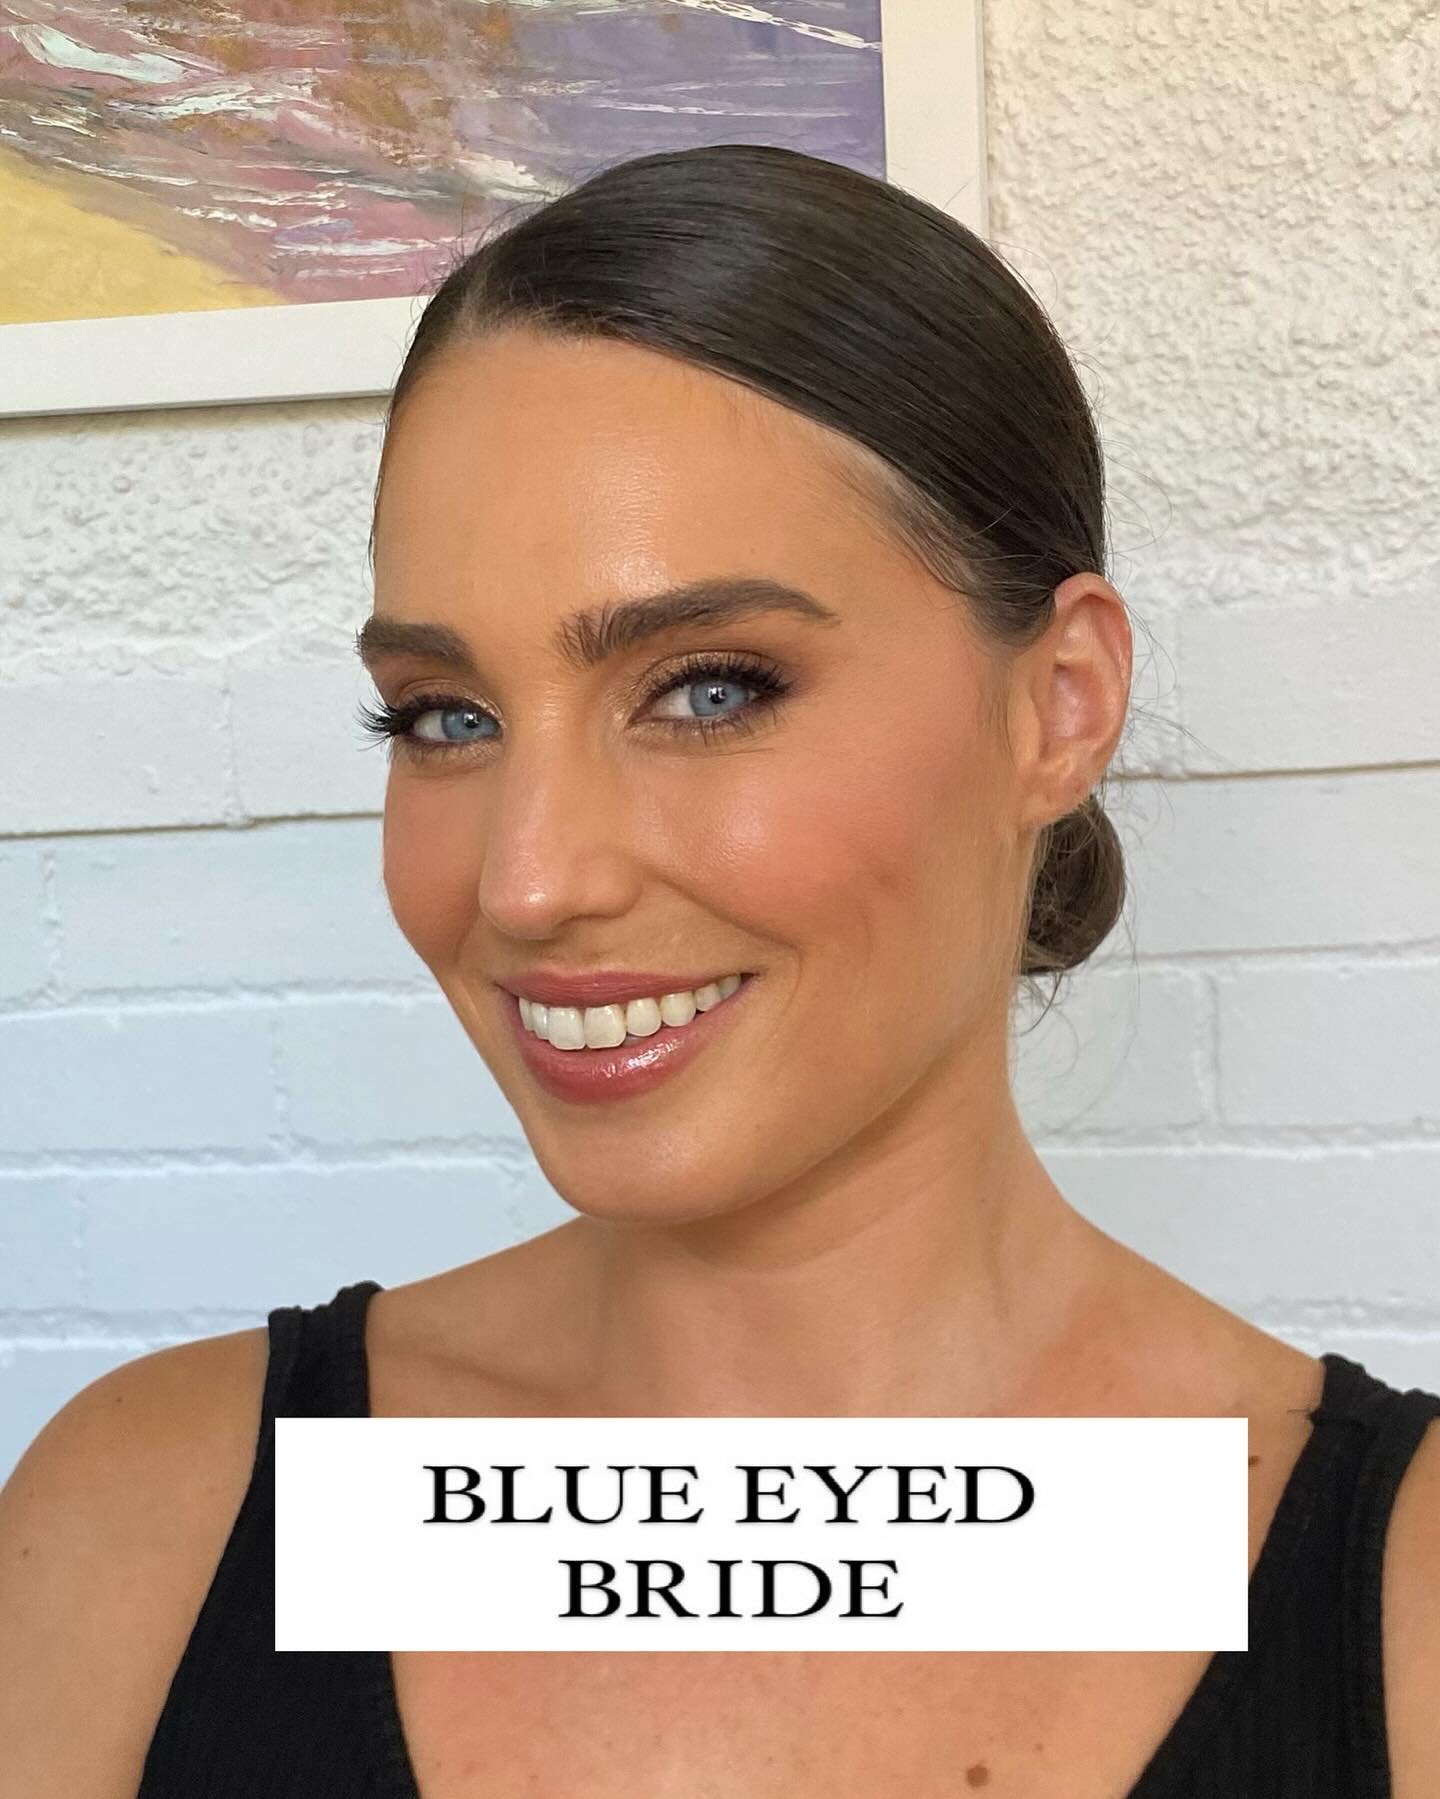 💙Blue Eyed Bride💙
Such A pleasure making up stunning Anita for her special day ✨💍
Enquire 👉🏼makeupbymelody@outlook.com to book! 📧
.
.
.
.
.
.
#sydneymakeupartist #sydneybridal #sydneybridalmakeup #sydneywedding #weddingmakeup #weddingmua #manly